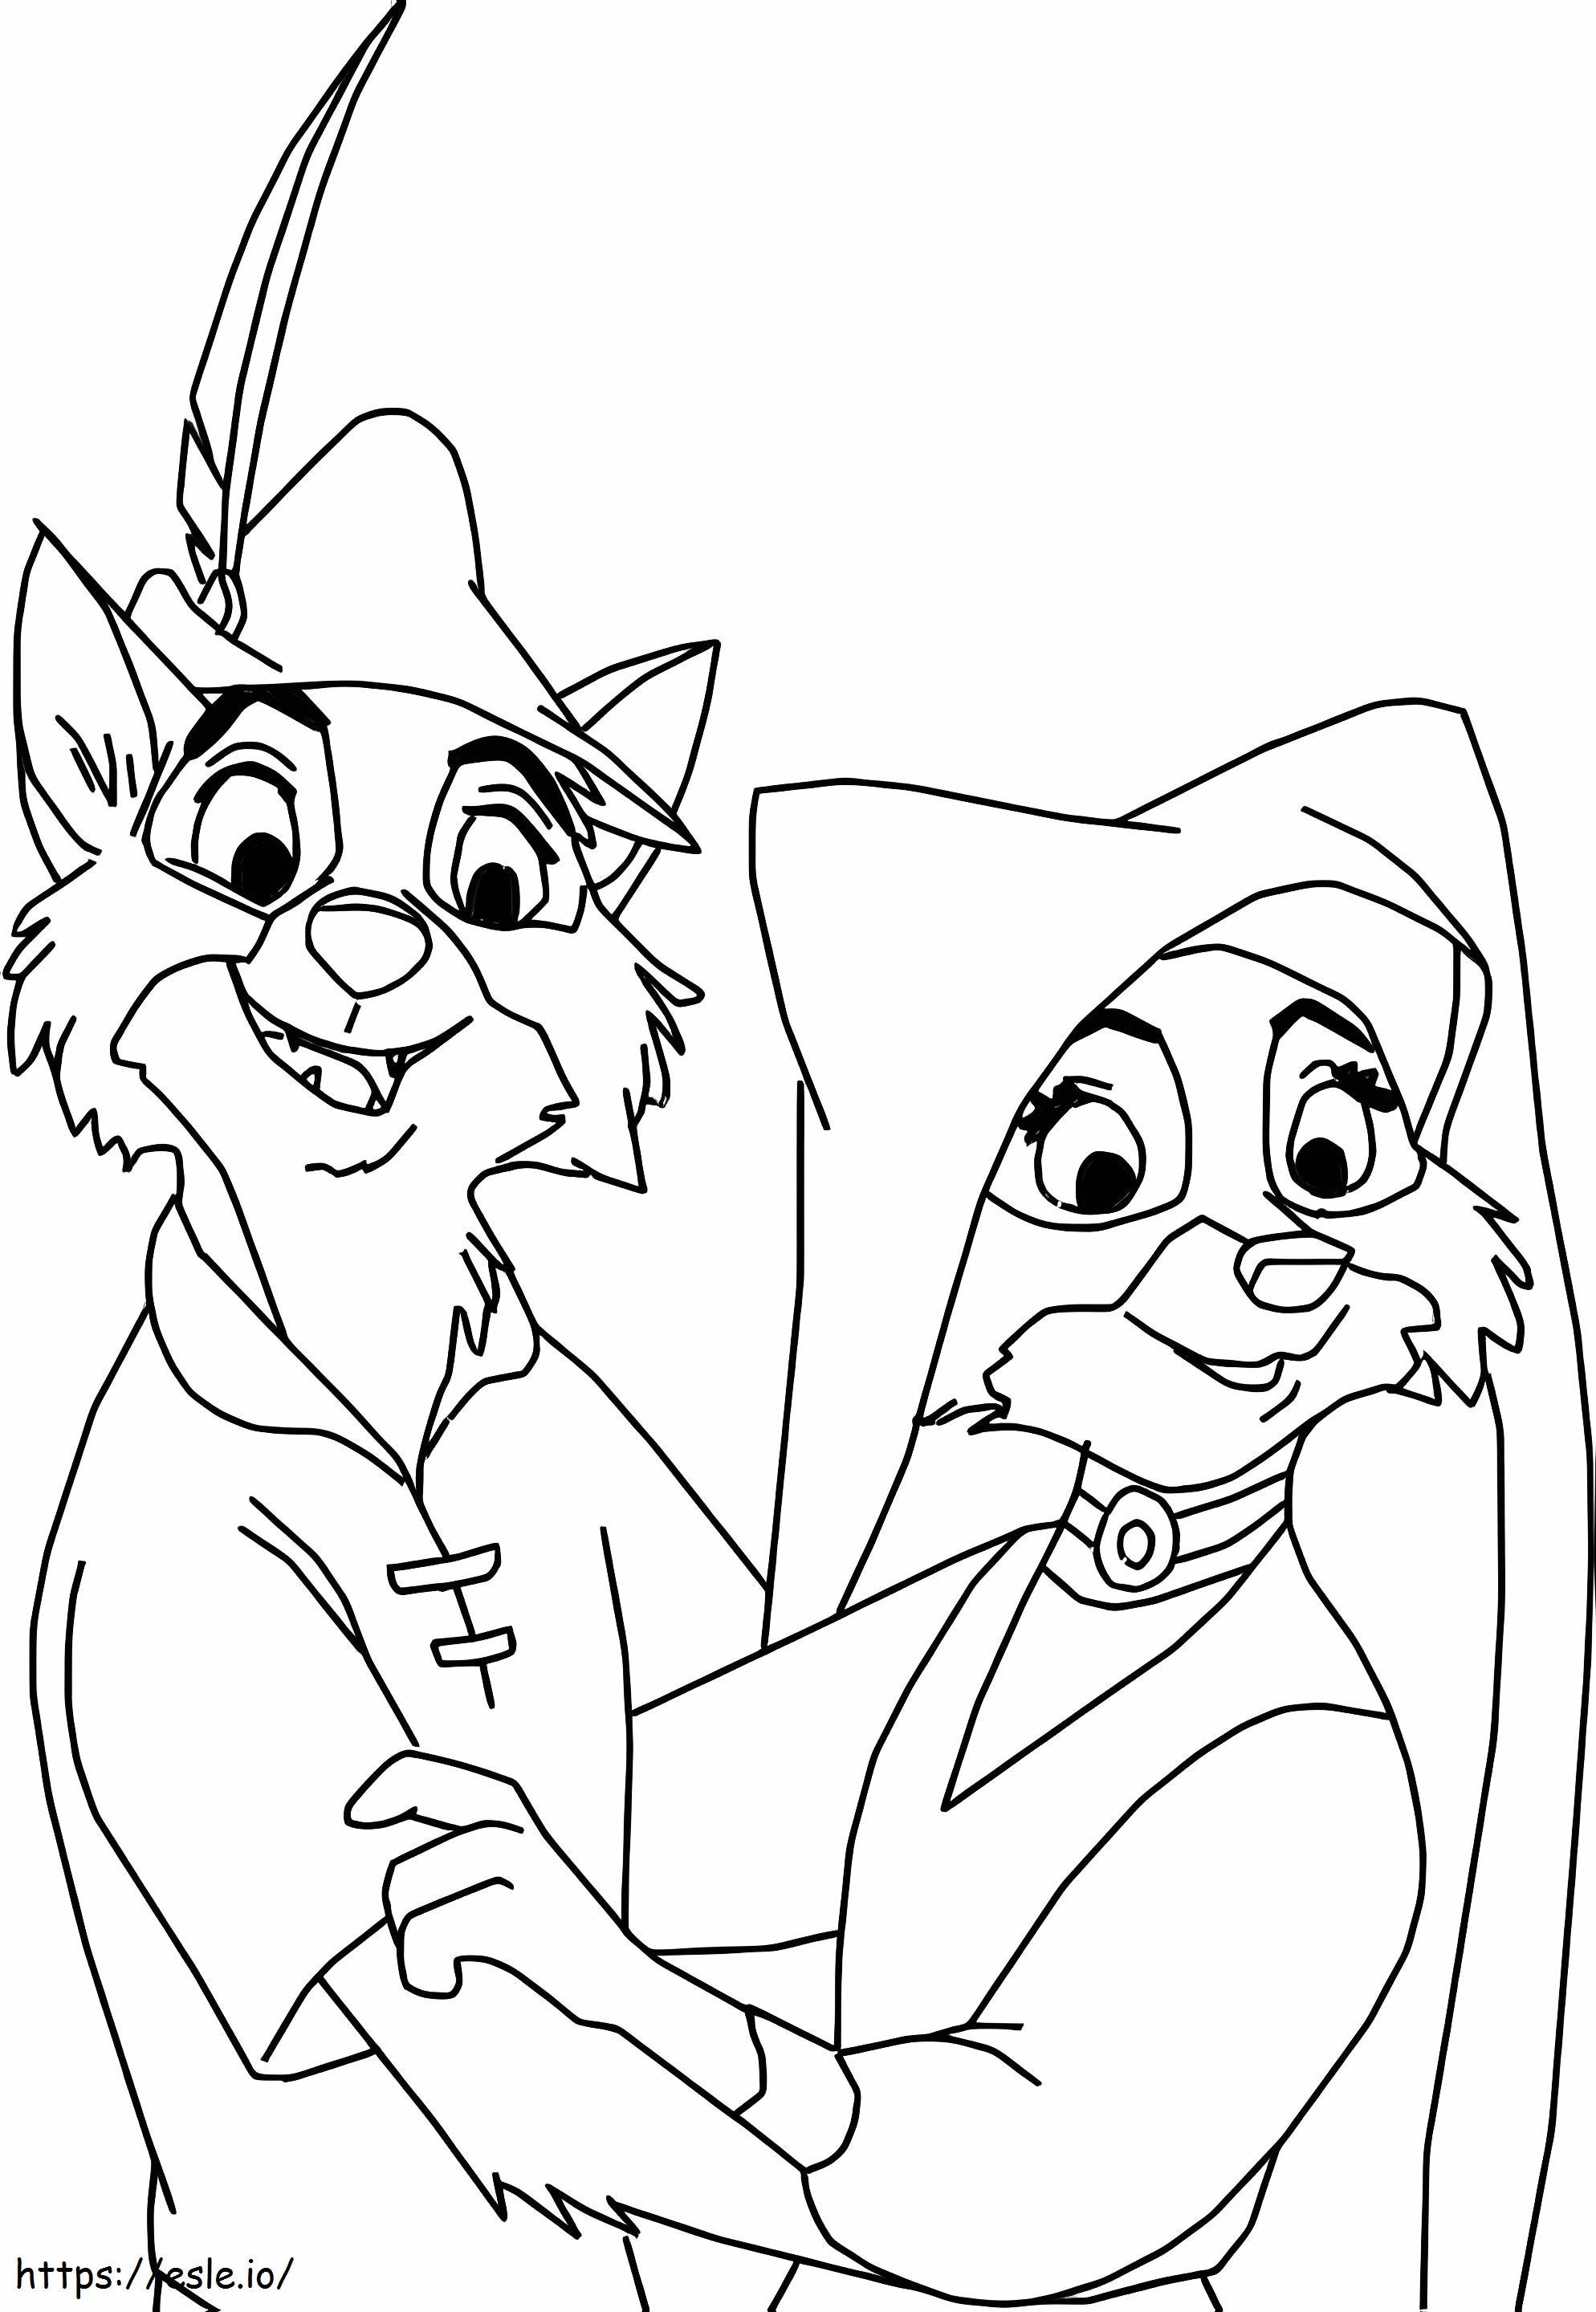 Beautiful Marianne And Robin Hood coloring page